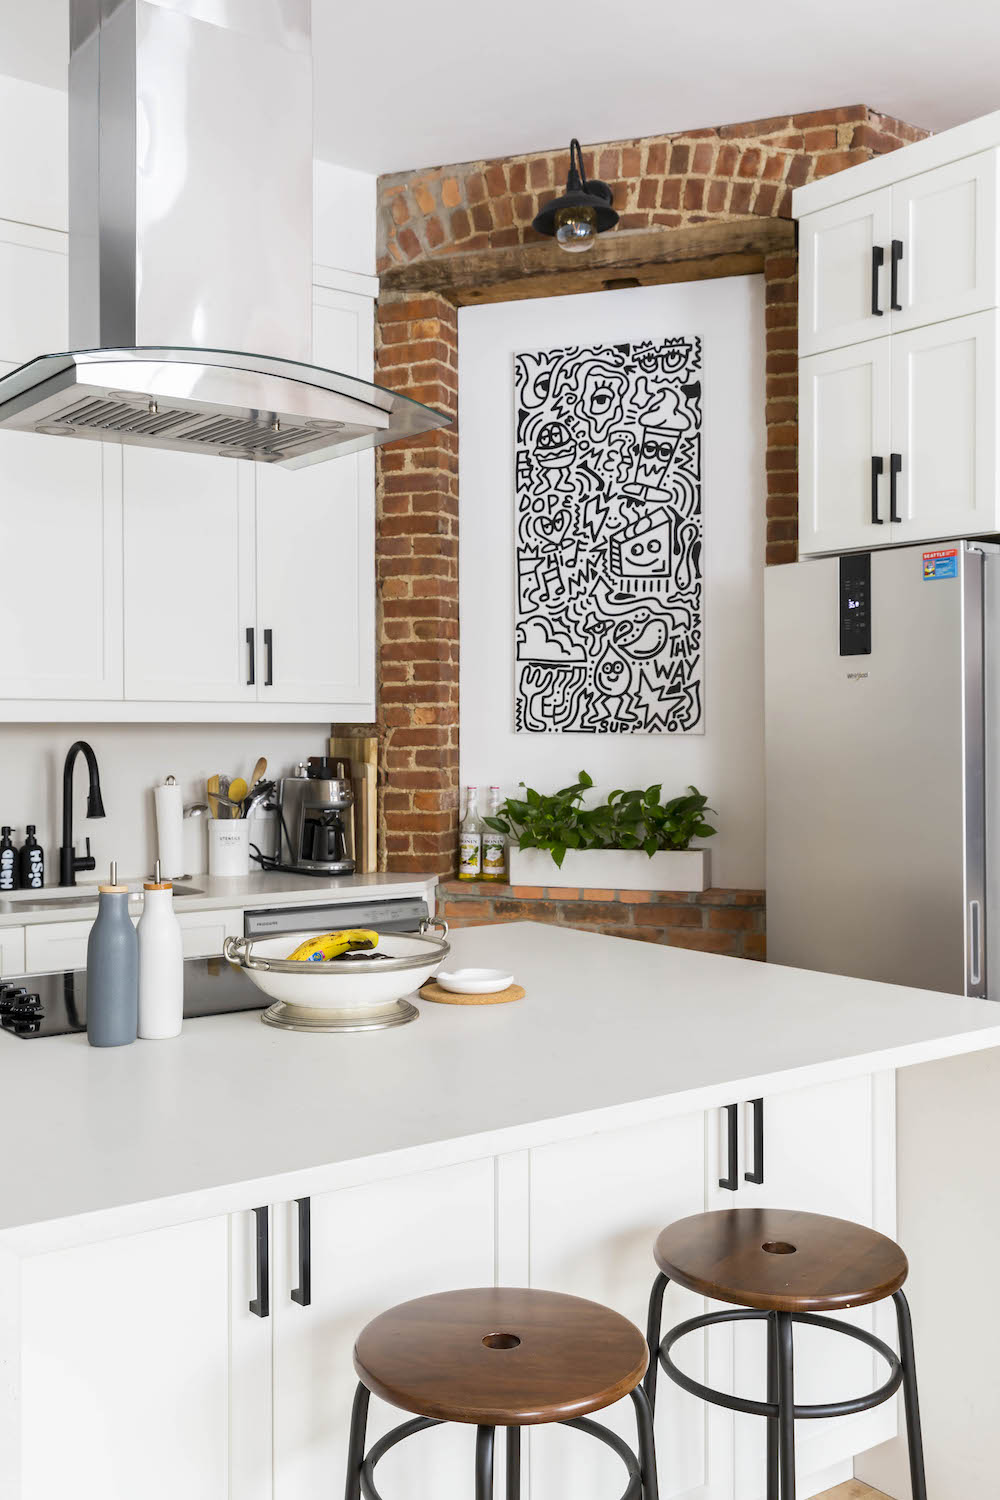 Kitchen island with art hanging on brick wall behind